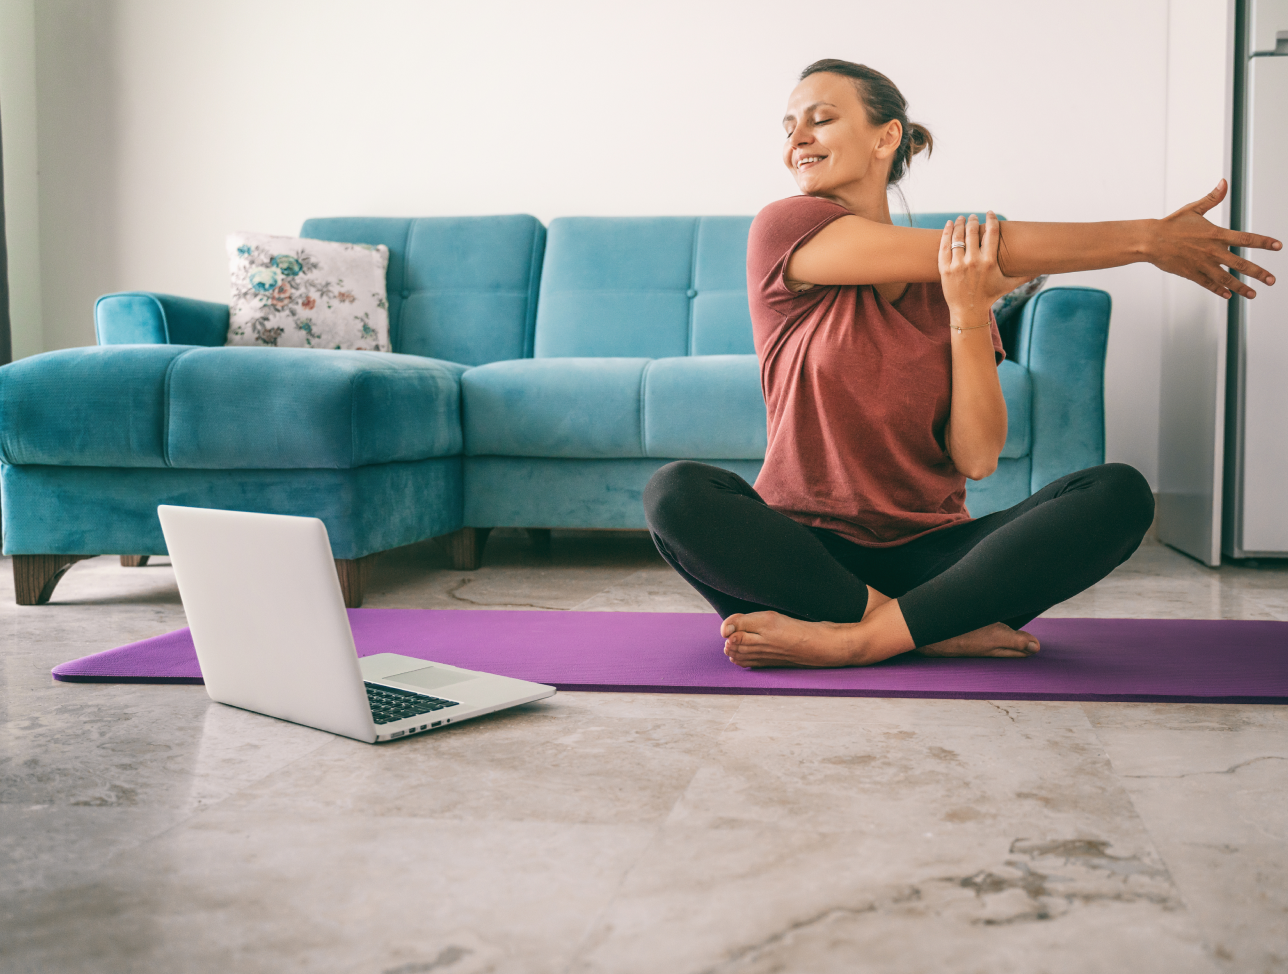 Woman using the internet to stream a yoga class on her laptop.